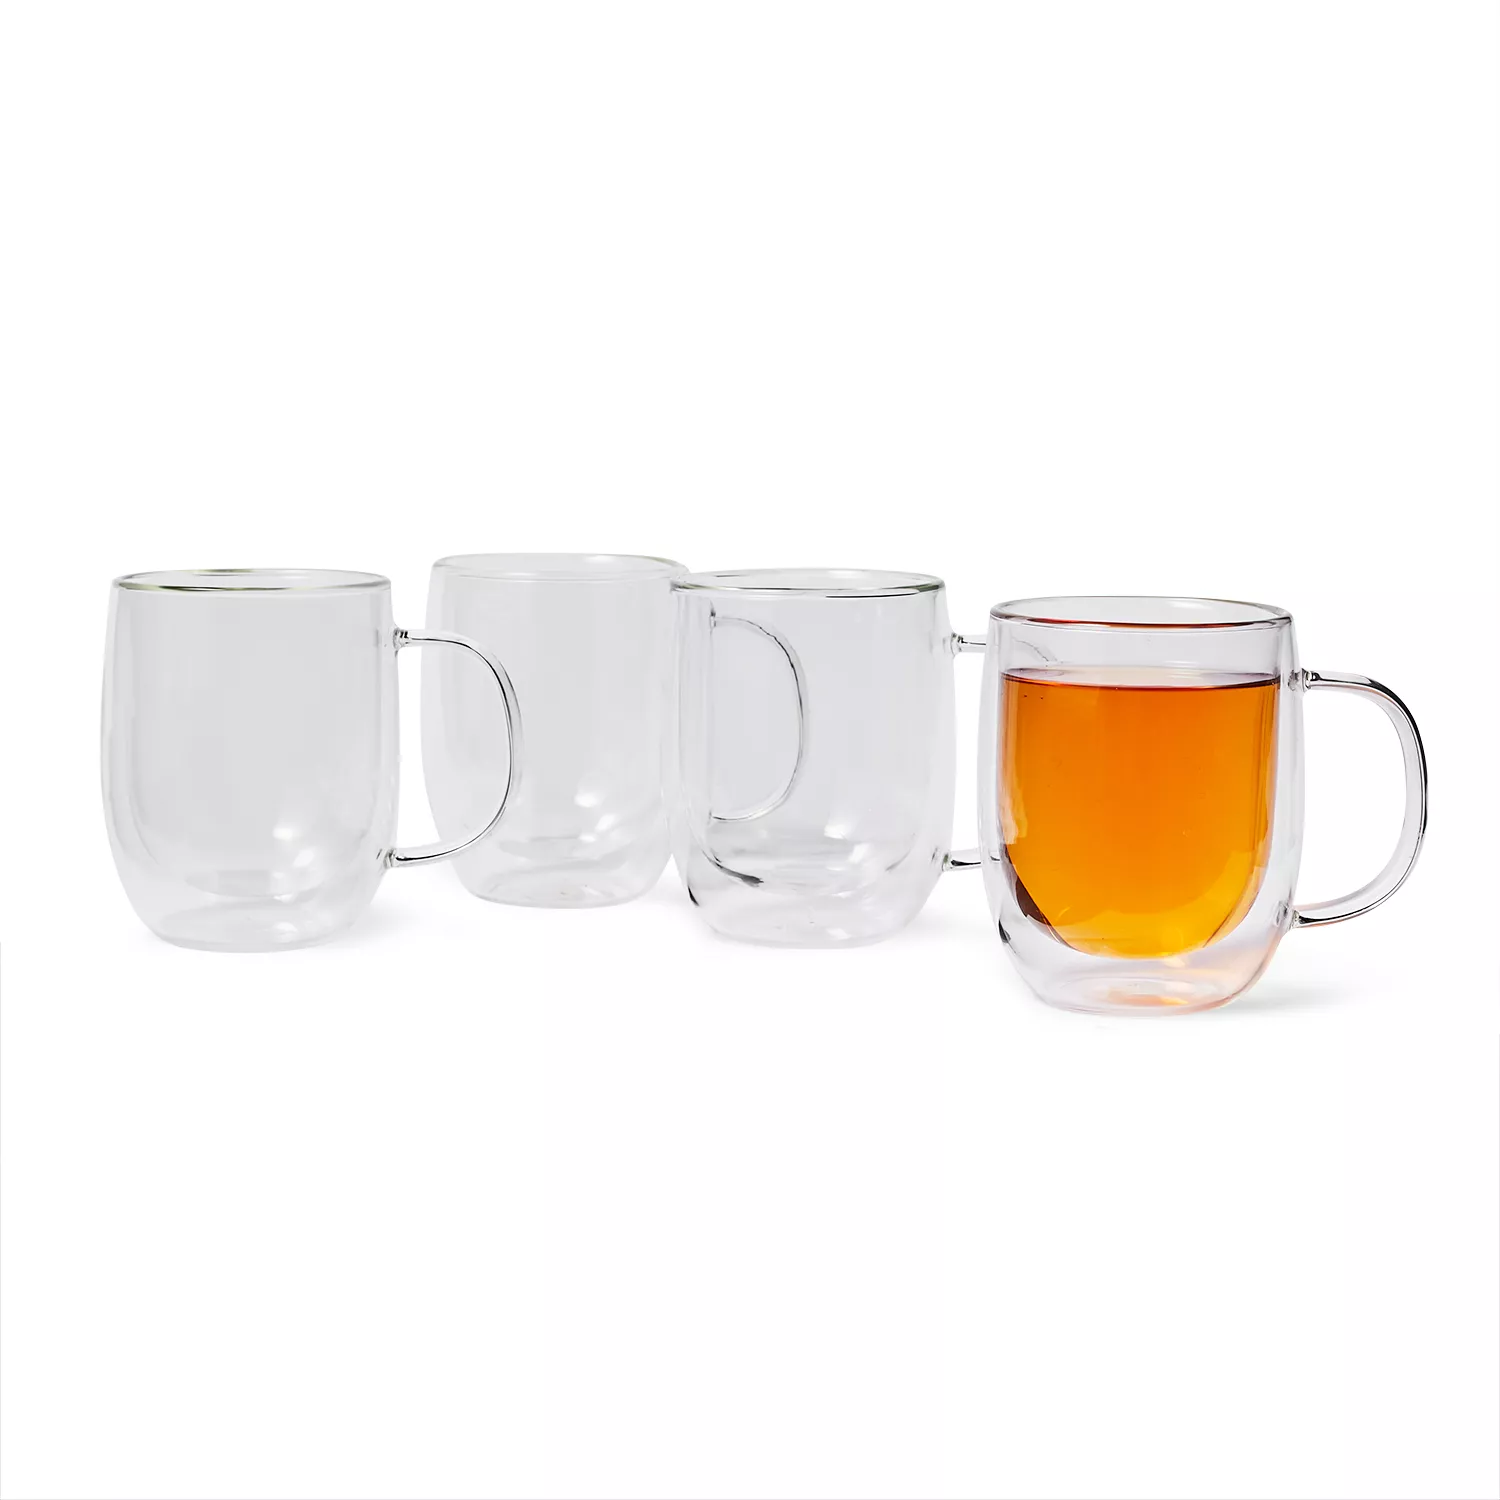 Double Wall Glass Cup Set  Best for Coffee, Tea - Sister.ly Drinkware